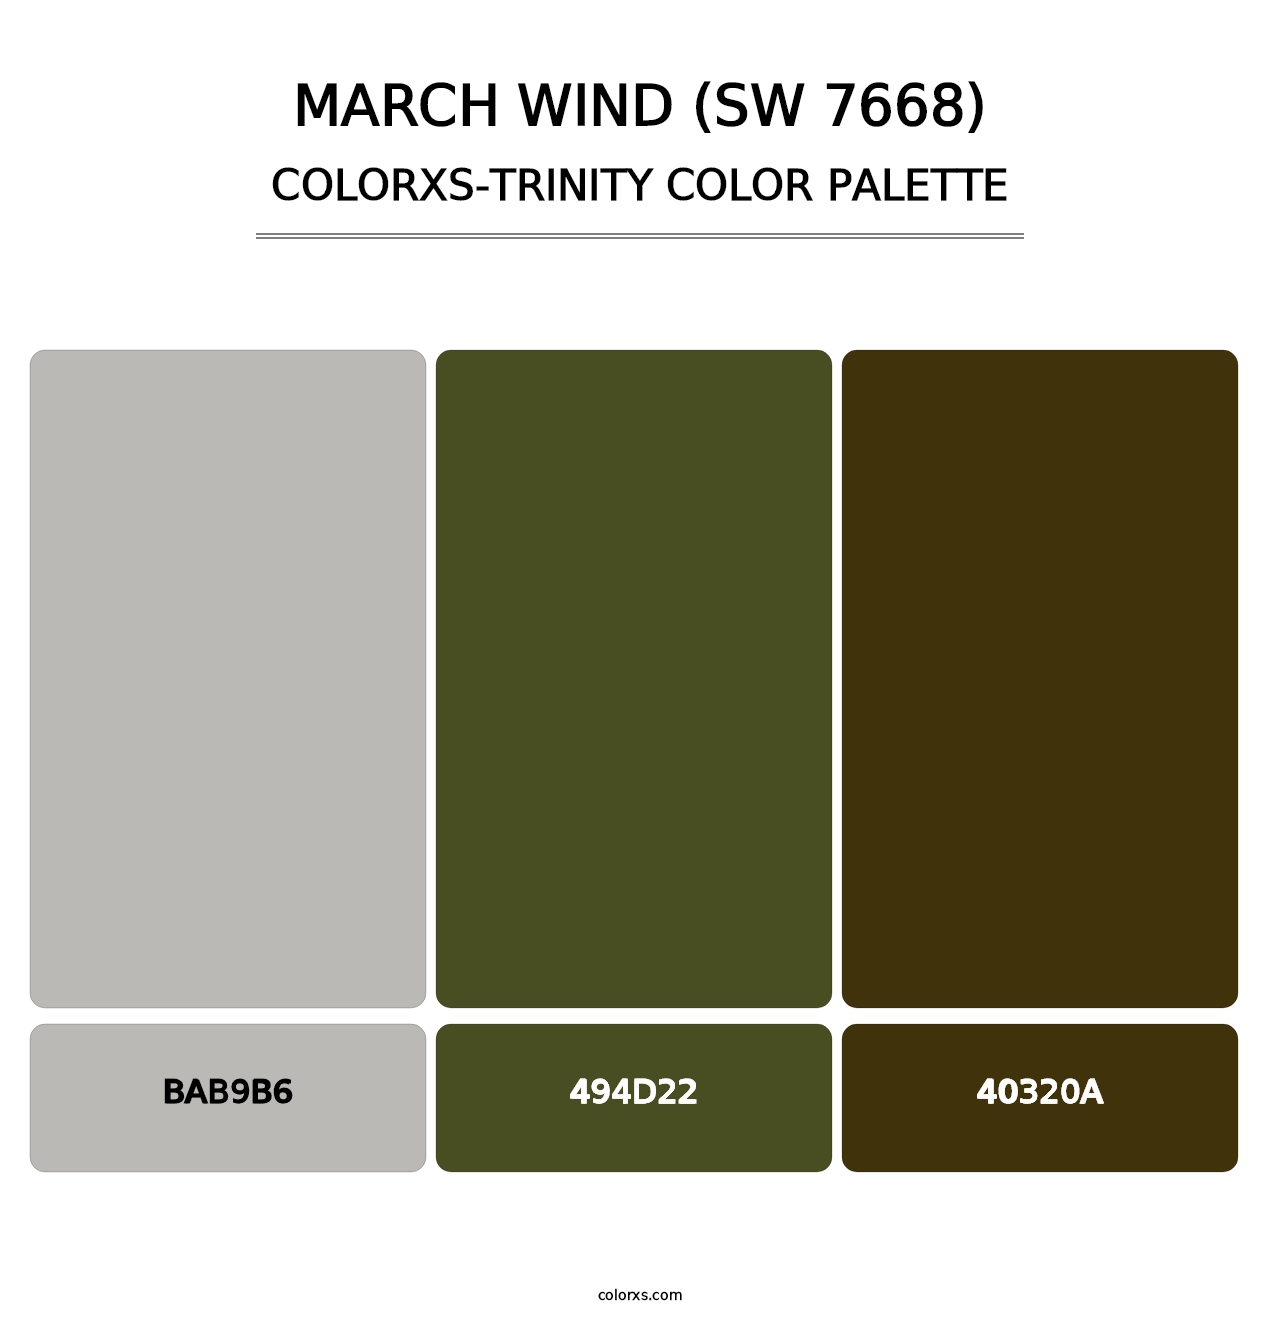 March Wind (SW 7668) - Colorxs Trinity Palette